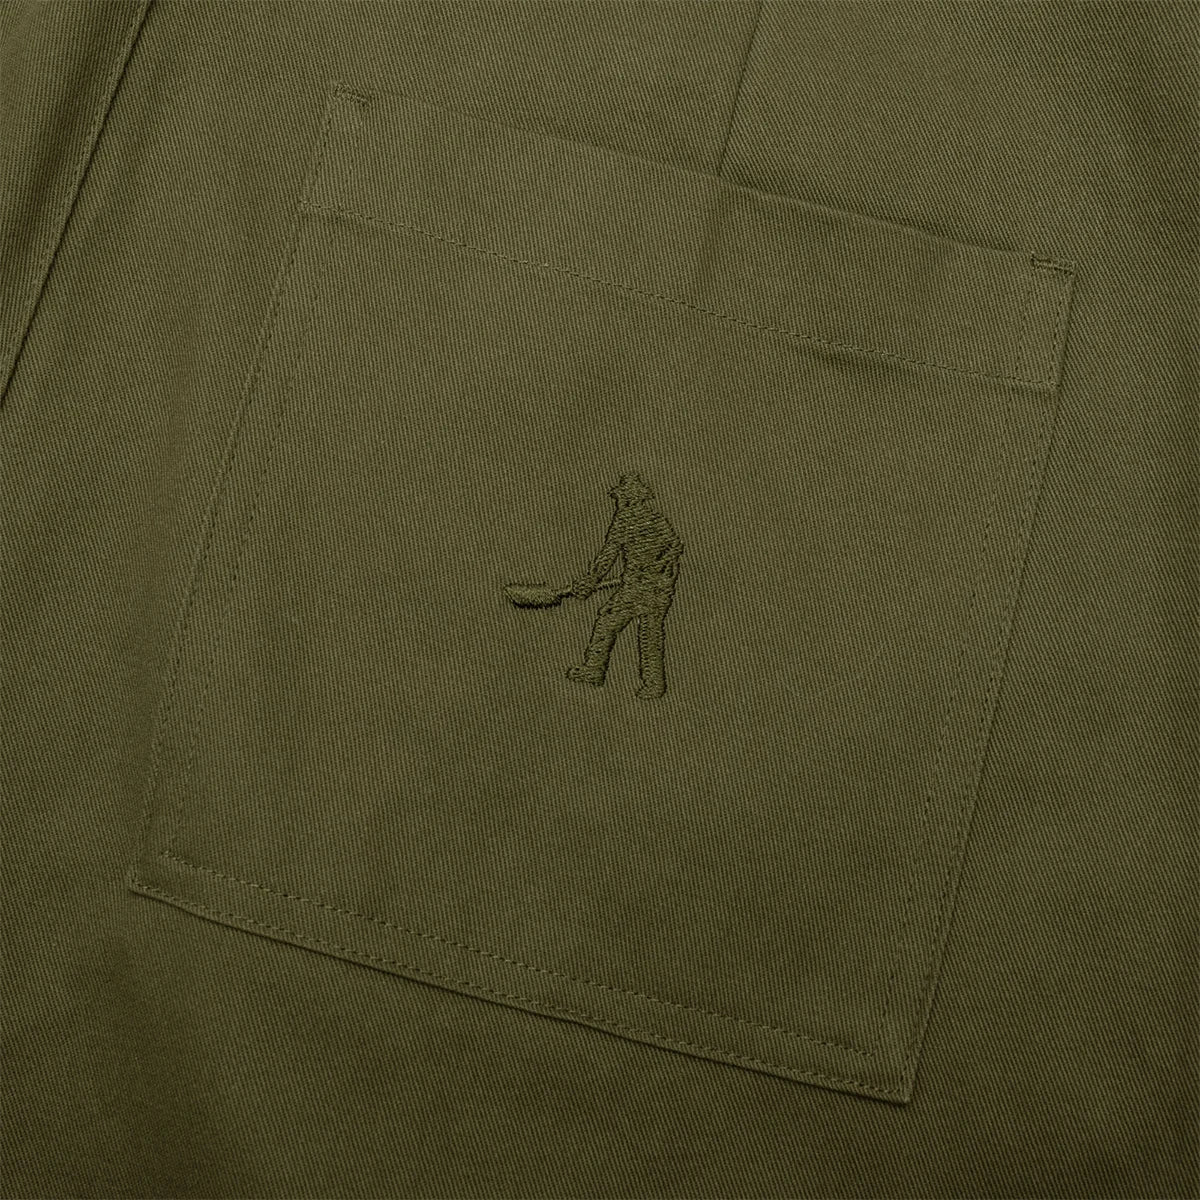 Passport Leagues Club Pant in Olive - Goodnews Skateshop